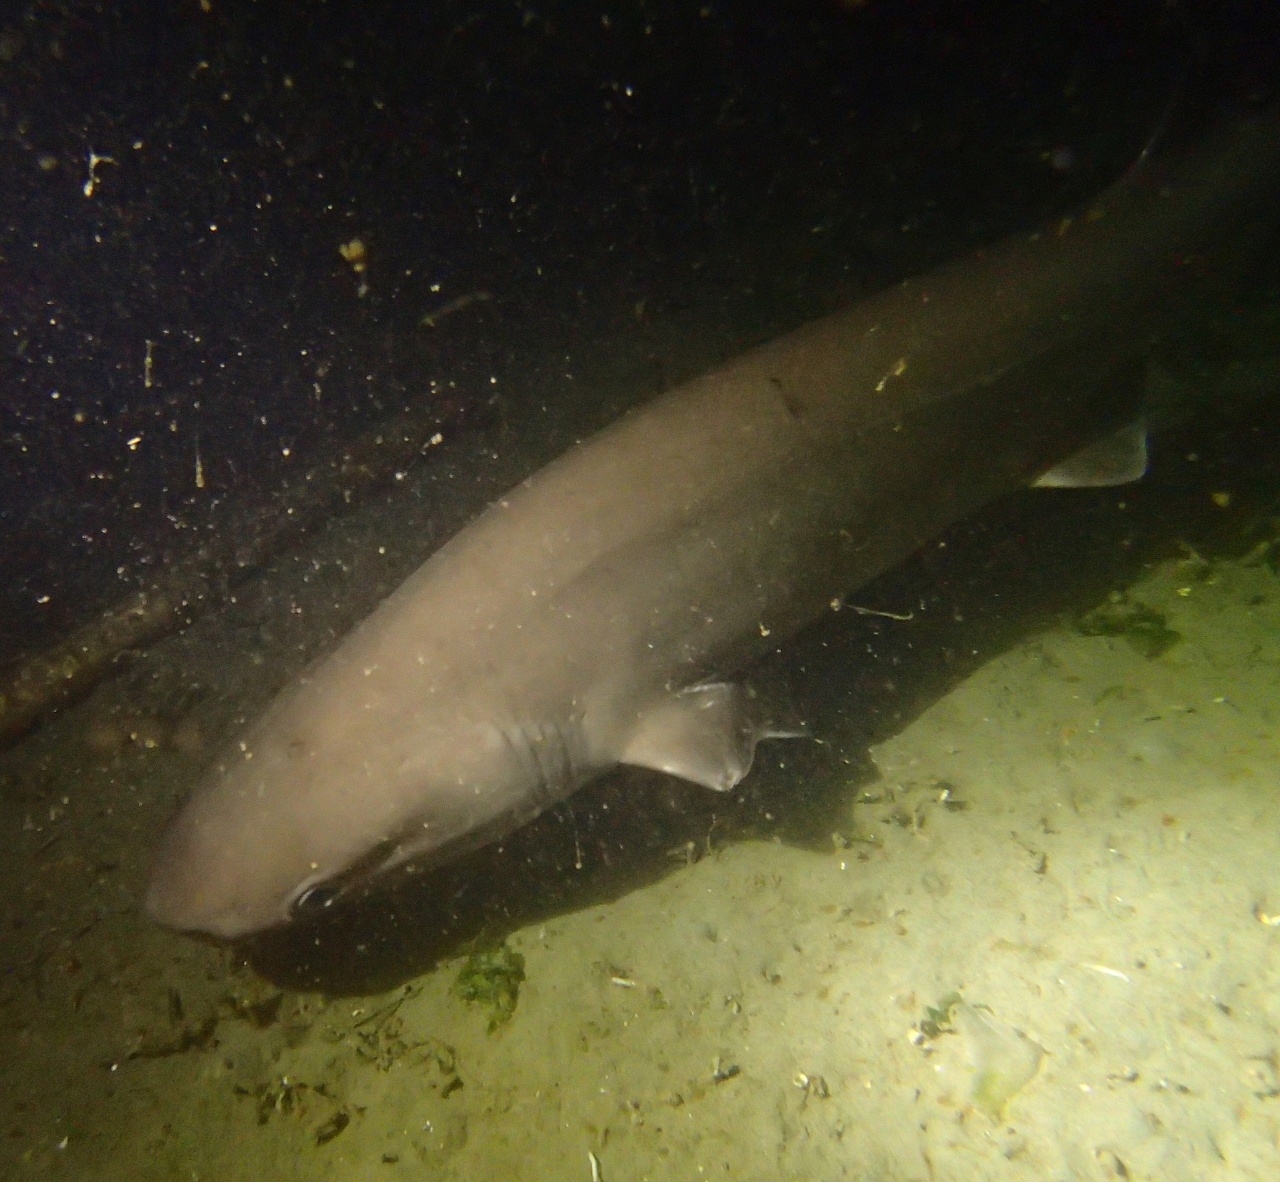 Requin griset - Hexanchus griseus - <a href='  https://inaturalist.ca/photos/94498043 '>Sara Thiebaud</a>, <a href=' https://creativecommons.org/licenses/by-nc/4.0/ '>CC BY-NC 4.0</a>, via iNaturalist - BioObs